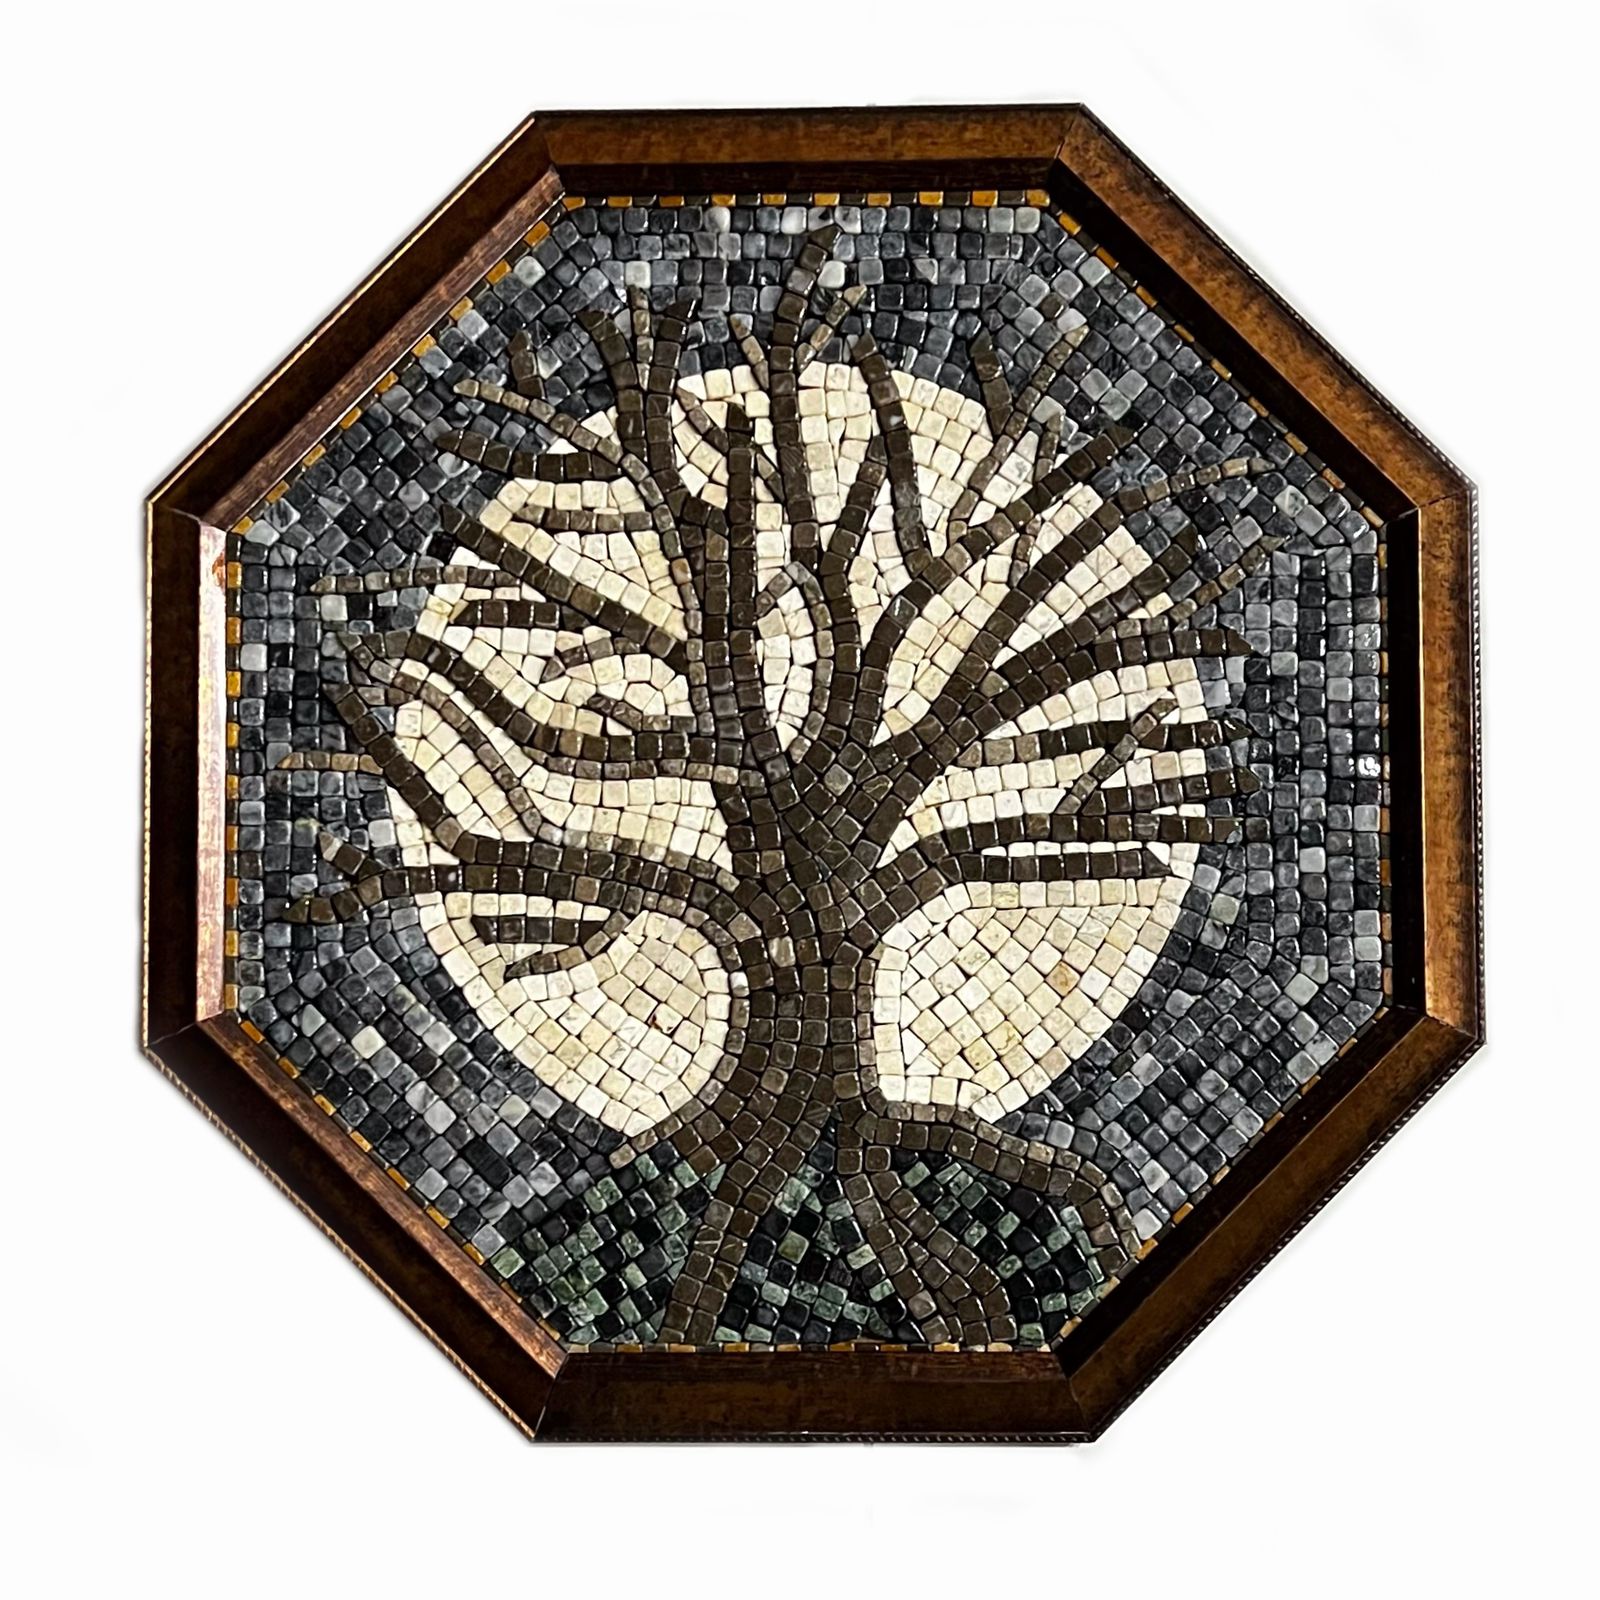 DEATH MOON TREE - Mosaic By Qureshi's